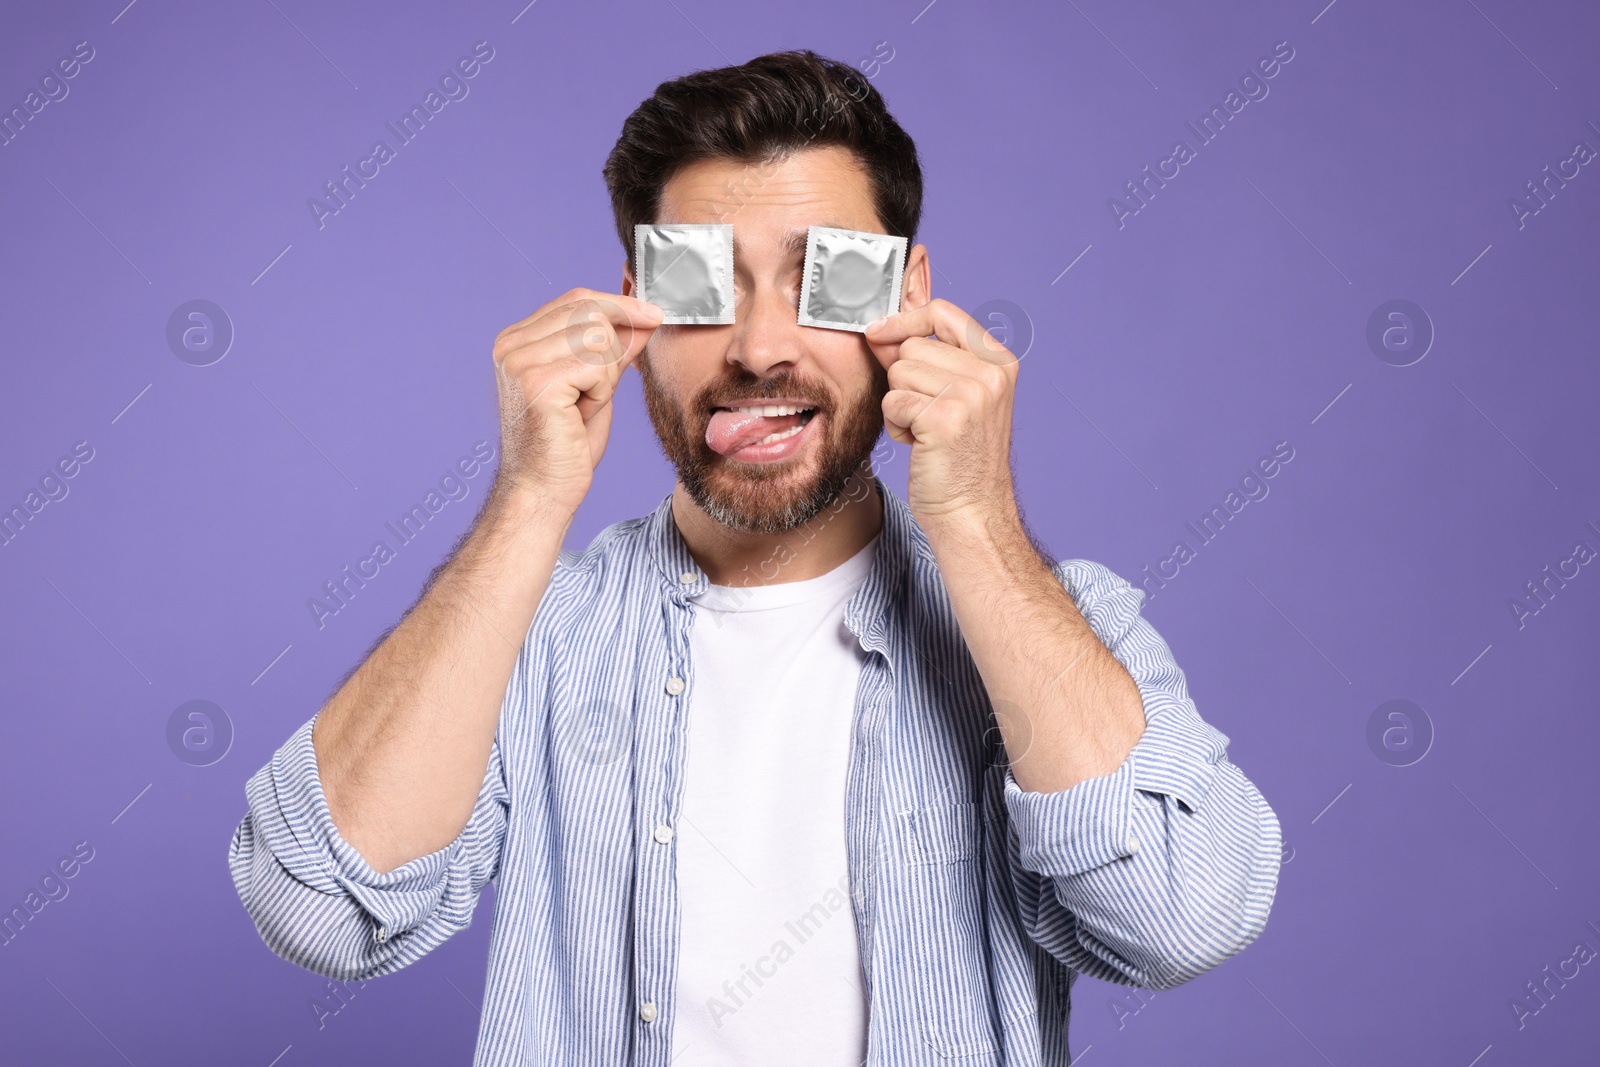 Photo of Man holding condoms near his eyes on purple background. Safe sex